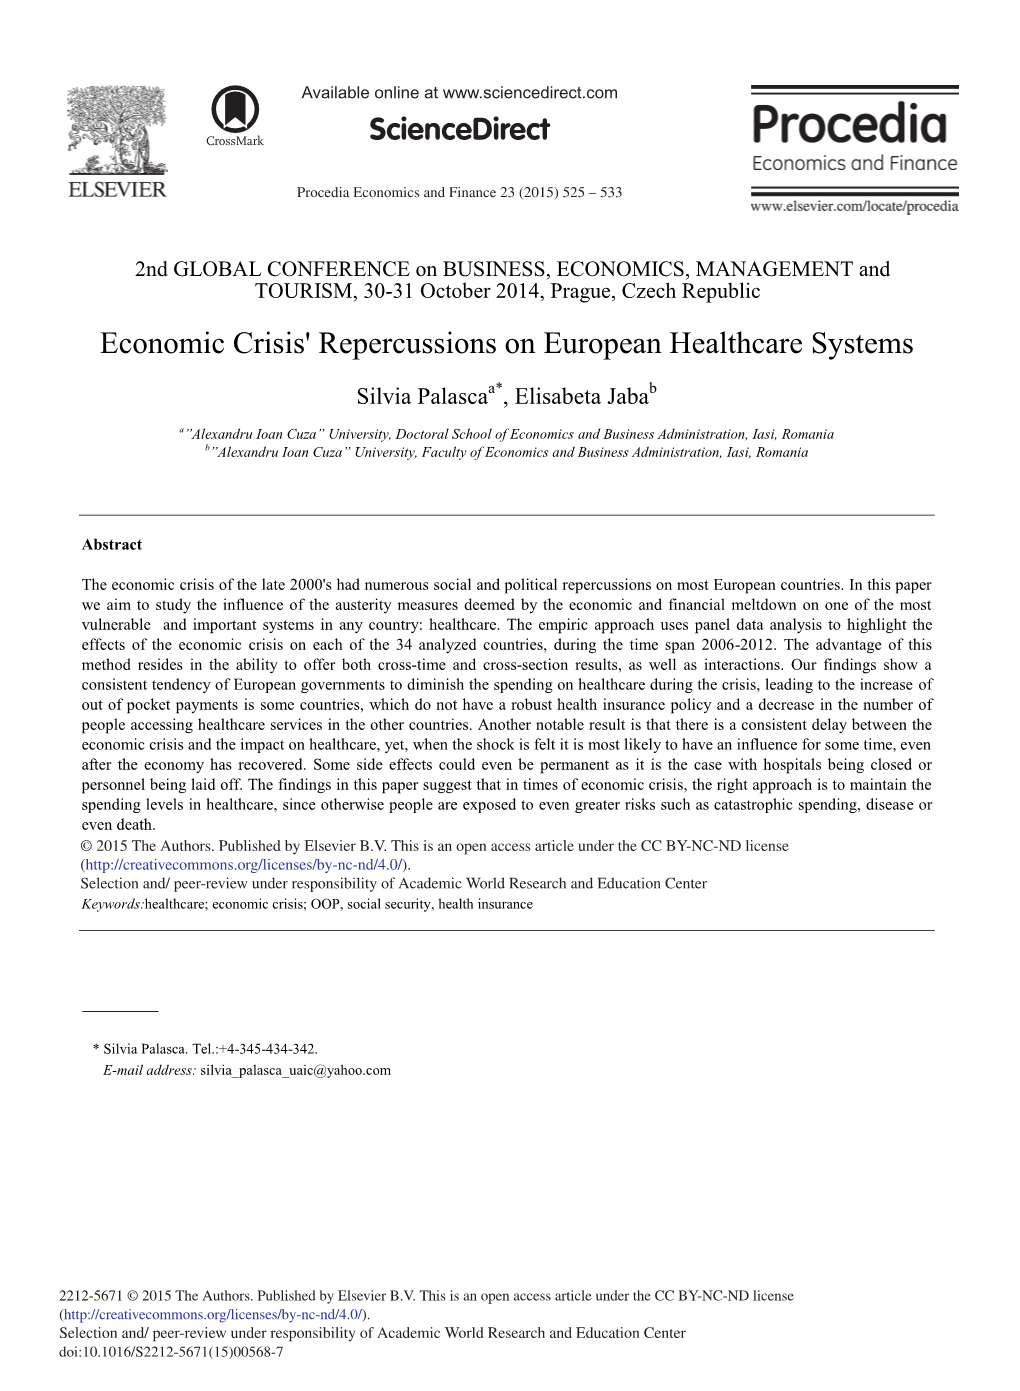 Economic Crisis' Repercussions on European Healthcare Systems